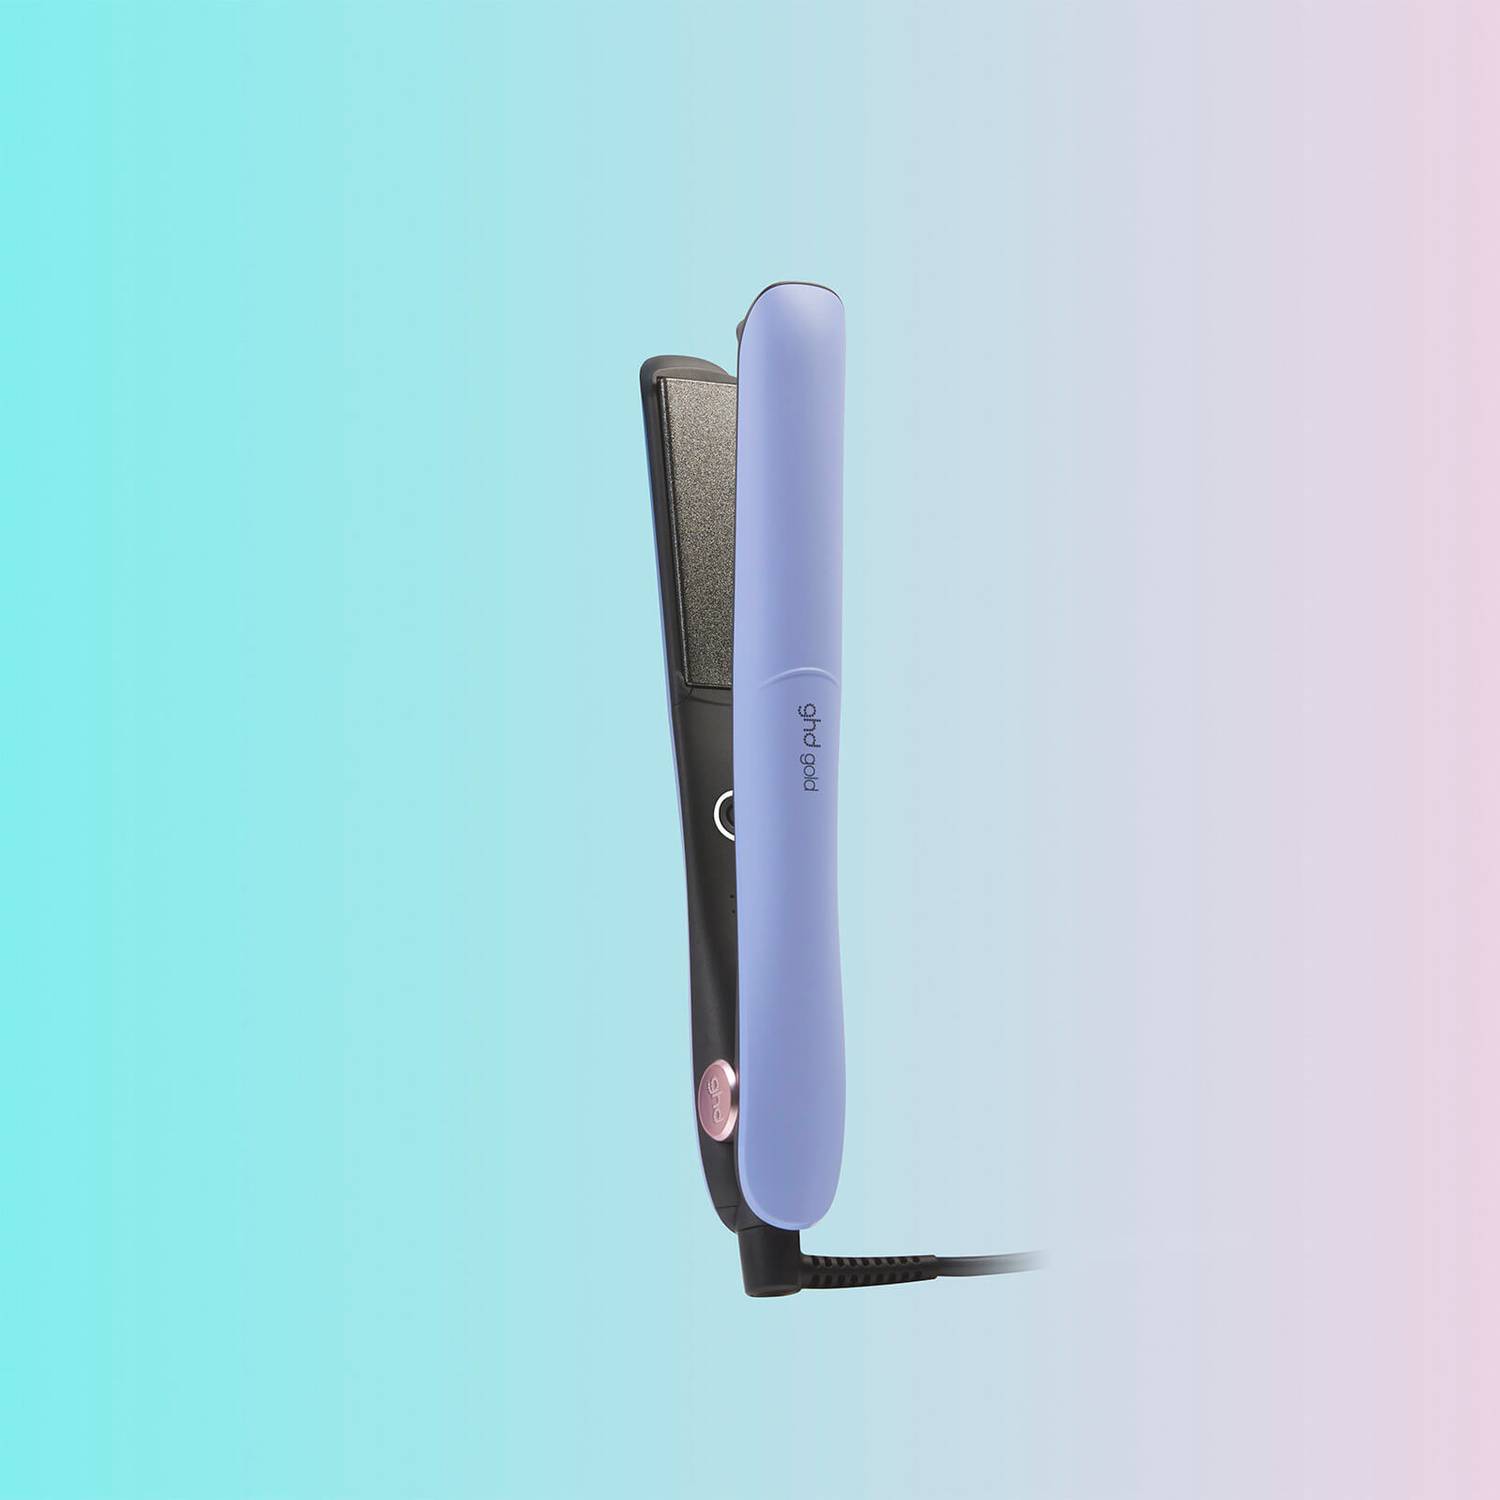 Ghd iD collection Gold Straightener in fresh lilac 